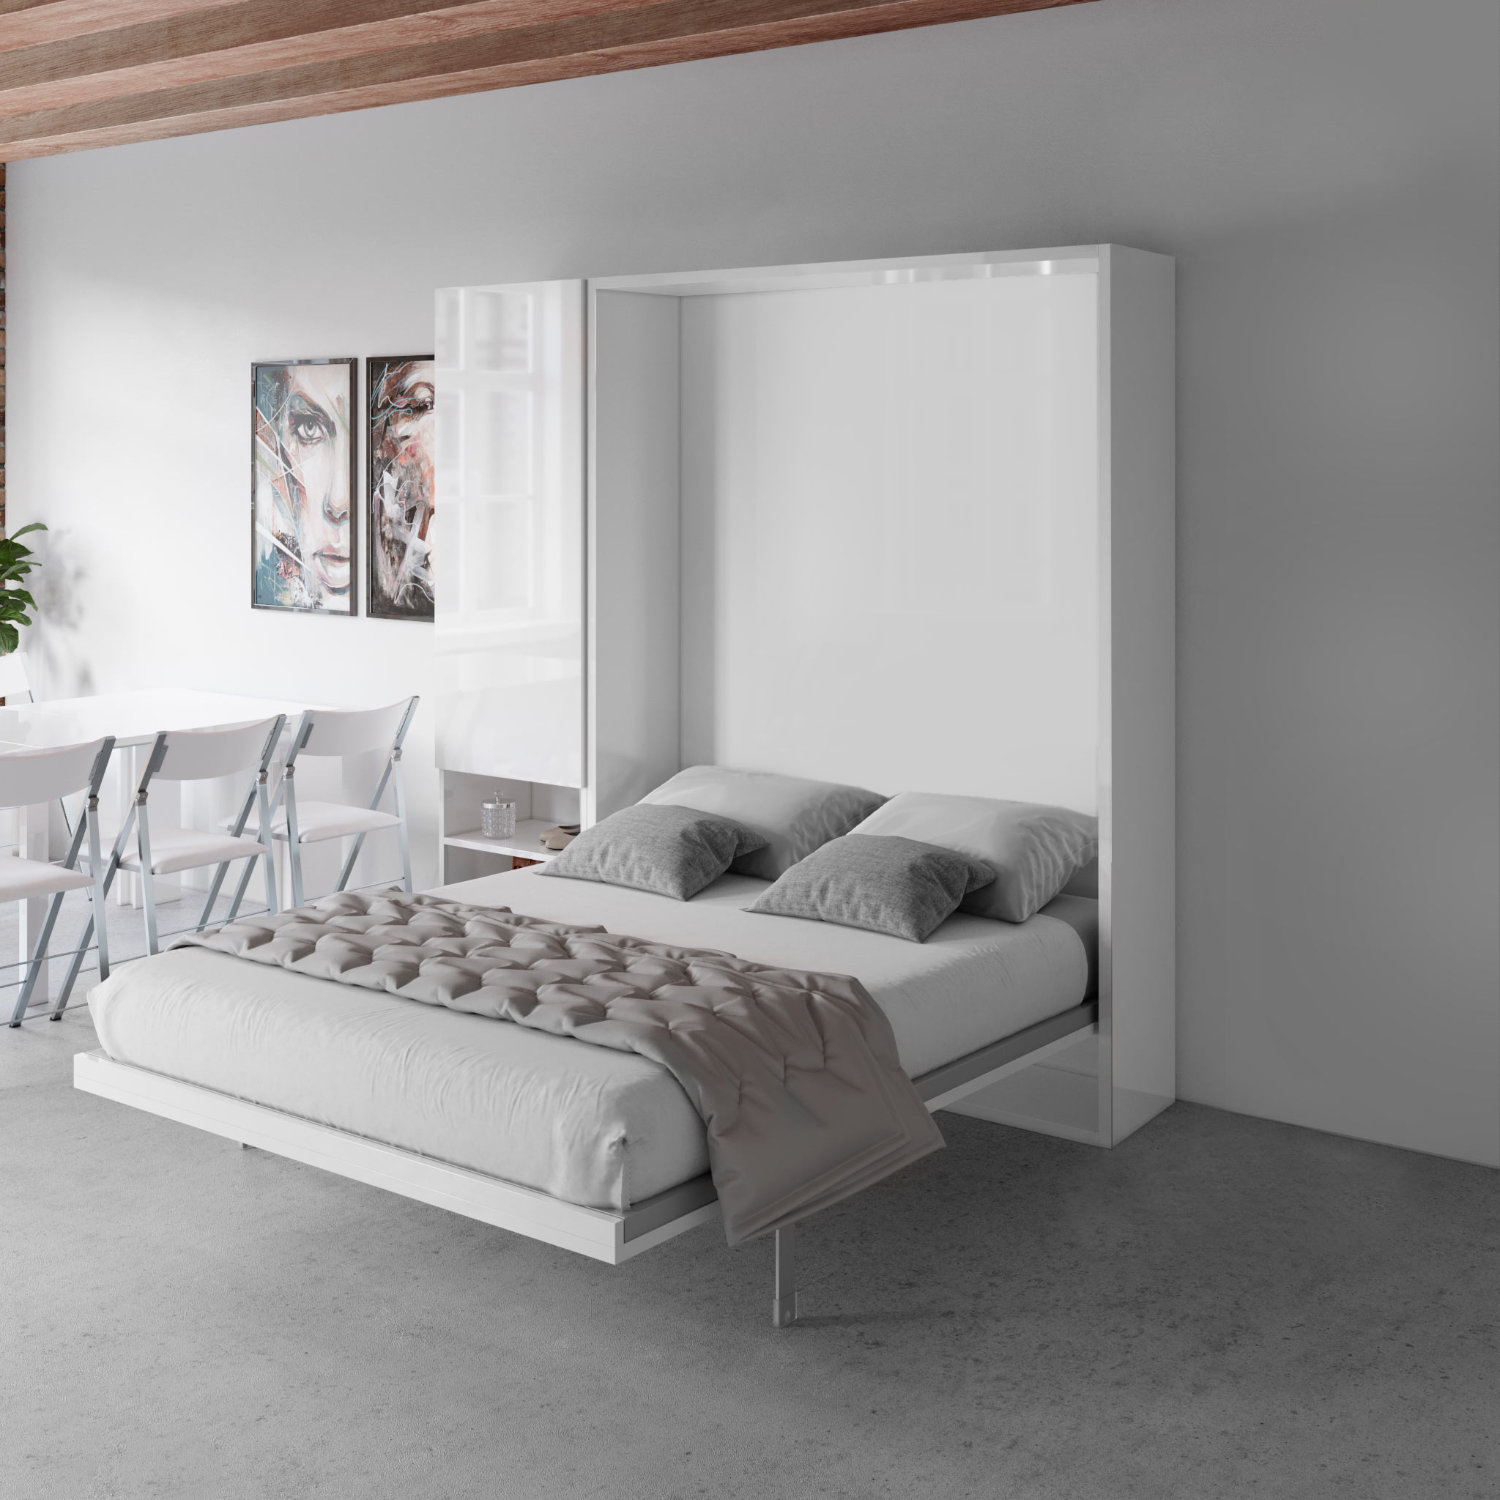 Hover Queen Wall Bed And 1 Cupboards In White Gloss In A Modern Room 